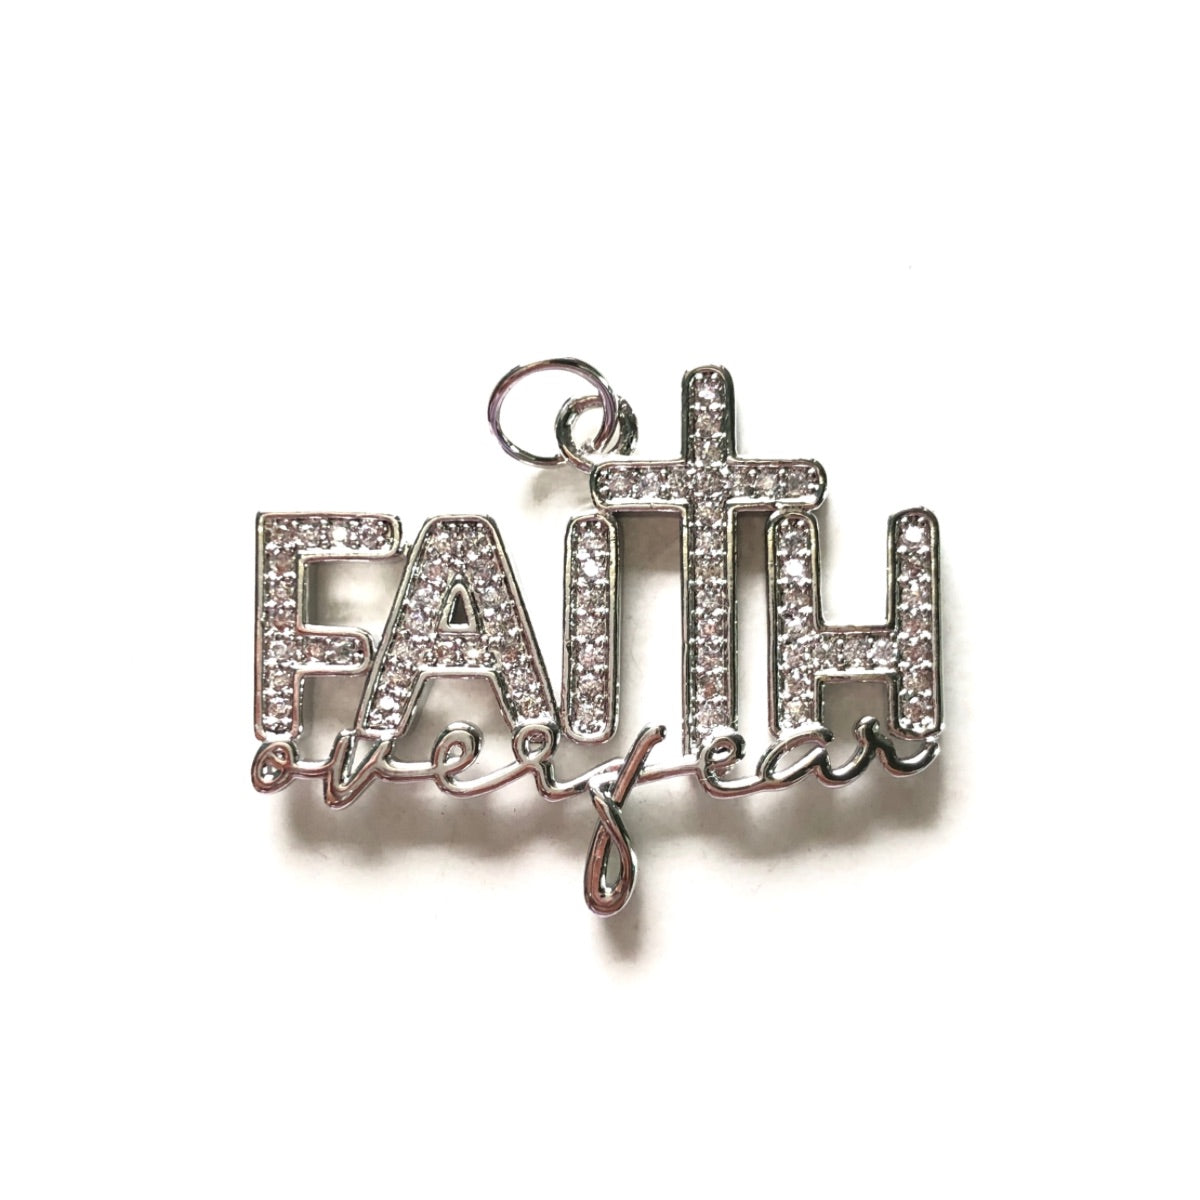 10pcs/lot CZ Paved Faith Over Fear Word Charms Silver CZ Paved Charms Christian Quotes New Charms Arrivals Charms Beads Beyond